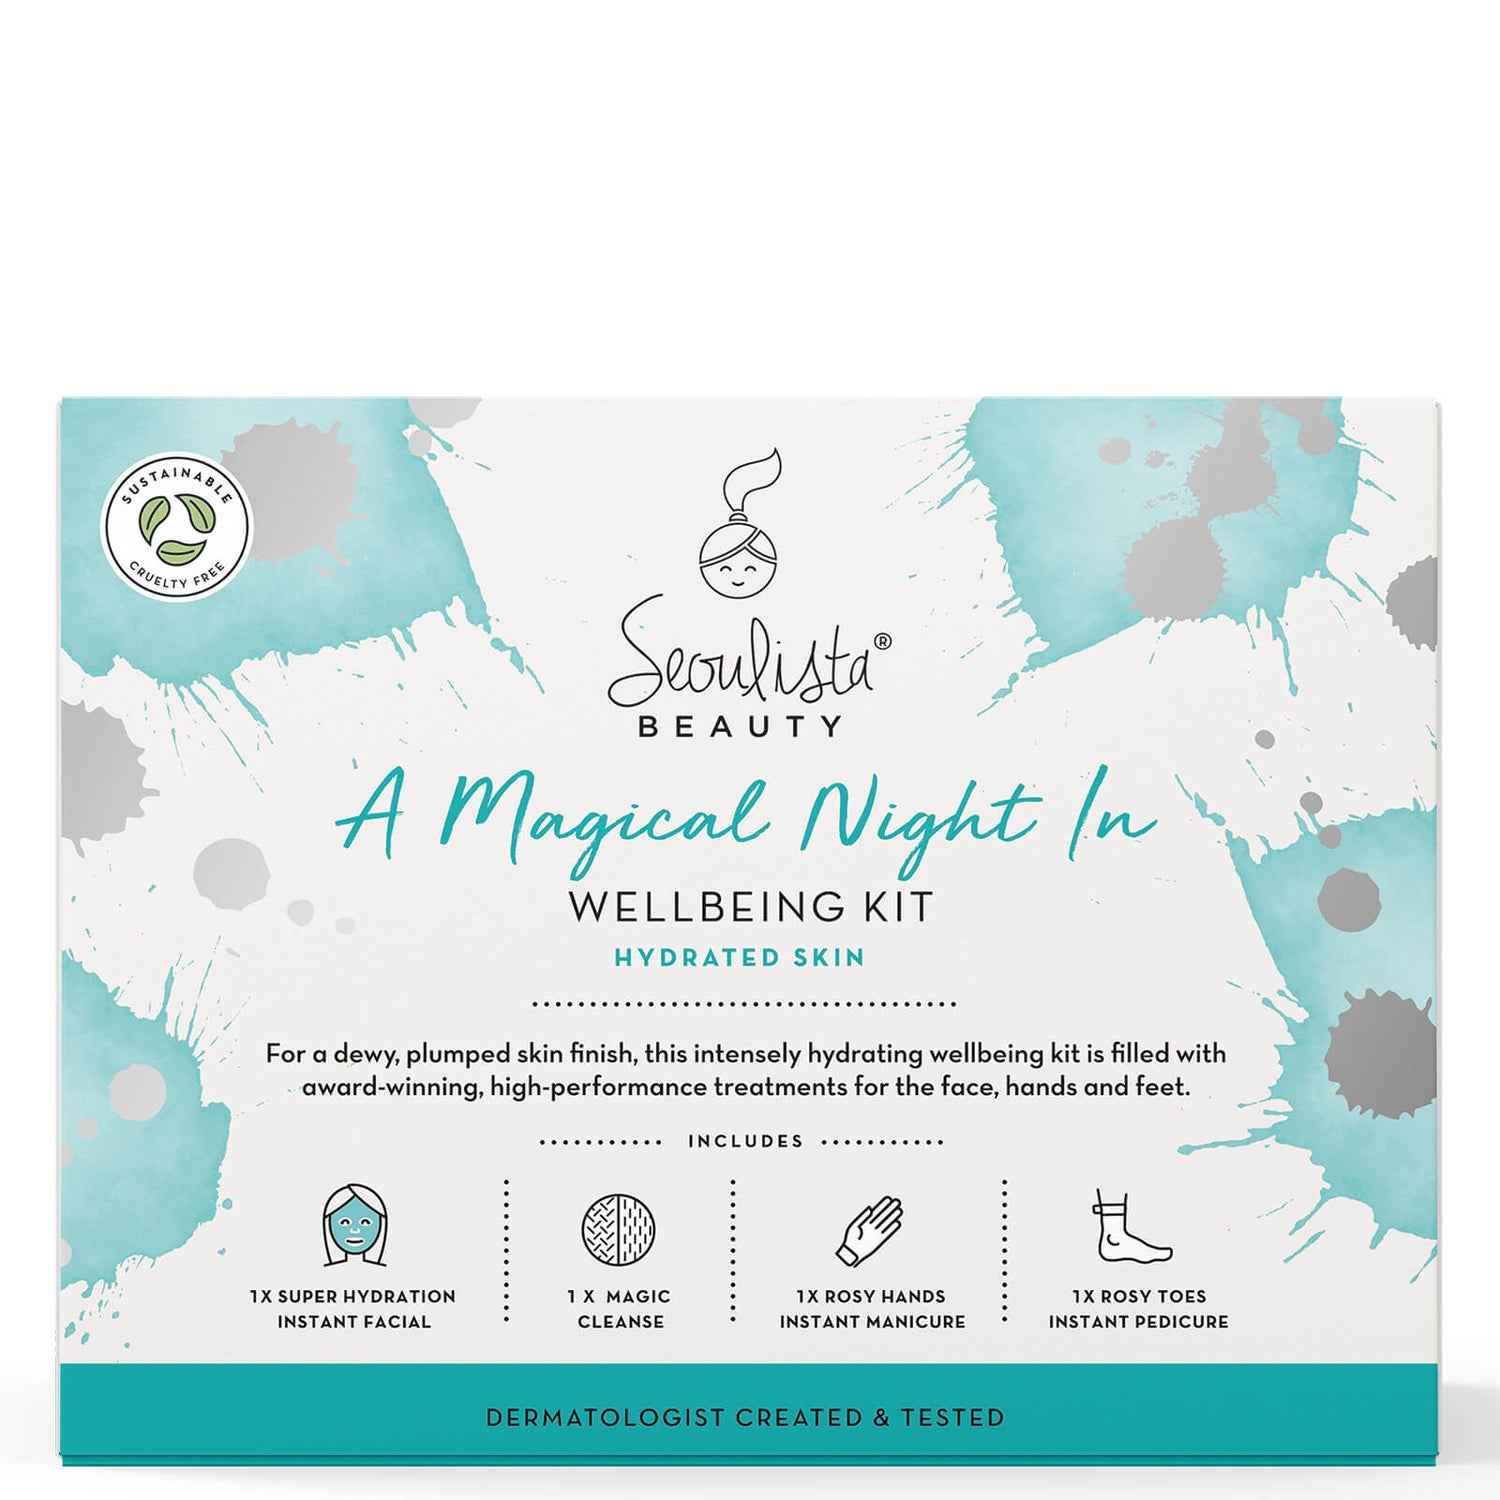 Seoulista Beauty A Magical Night In Wellbeing Kit - Hydrated Skin